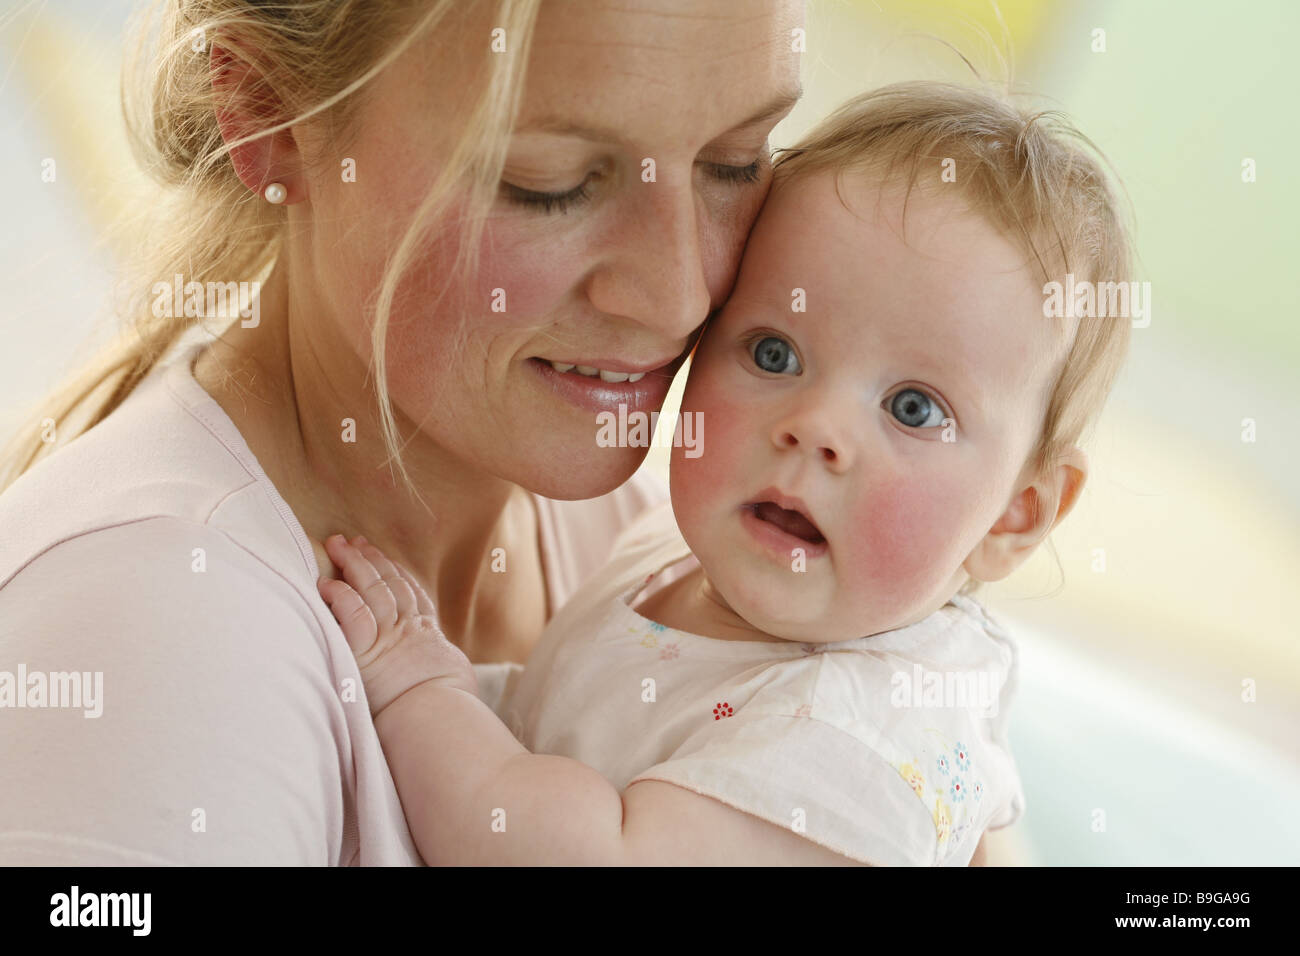 Mother baby embraces smiling portrait  20-30 years 5 months broached wakened alertly attention baby guarding adherence woman Stock Photo